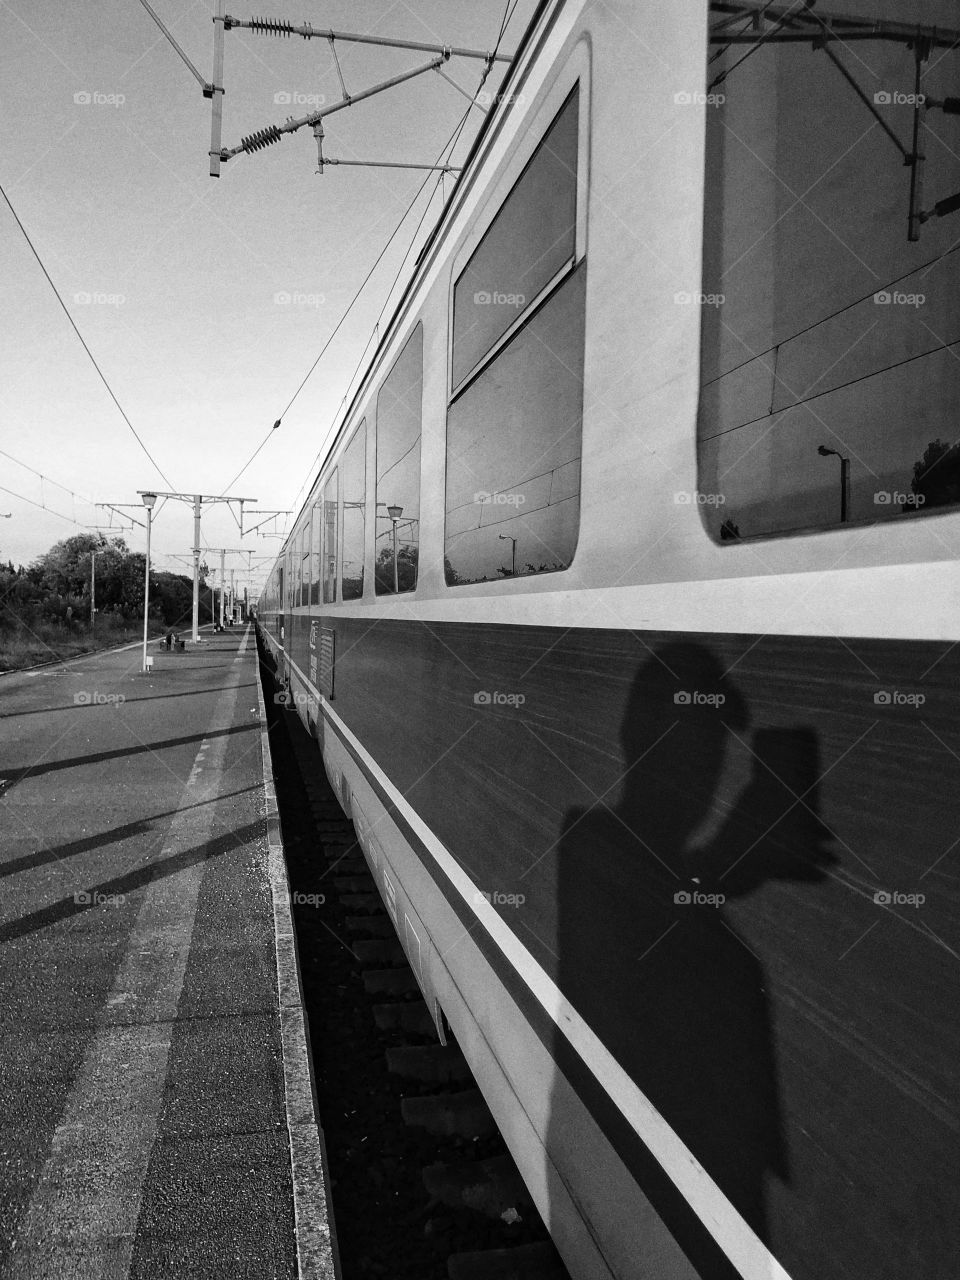 Shadow on a moving train